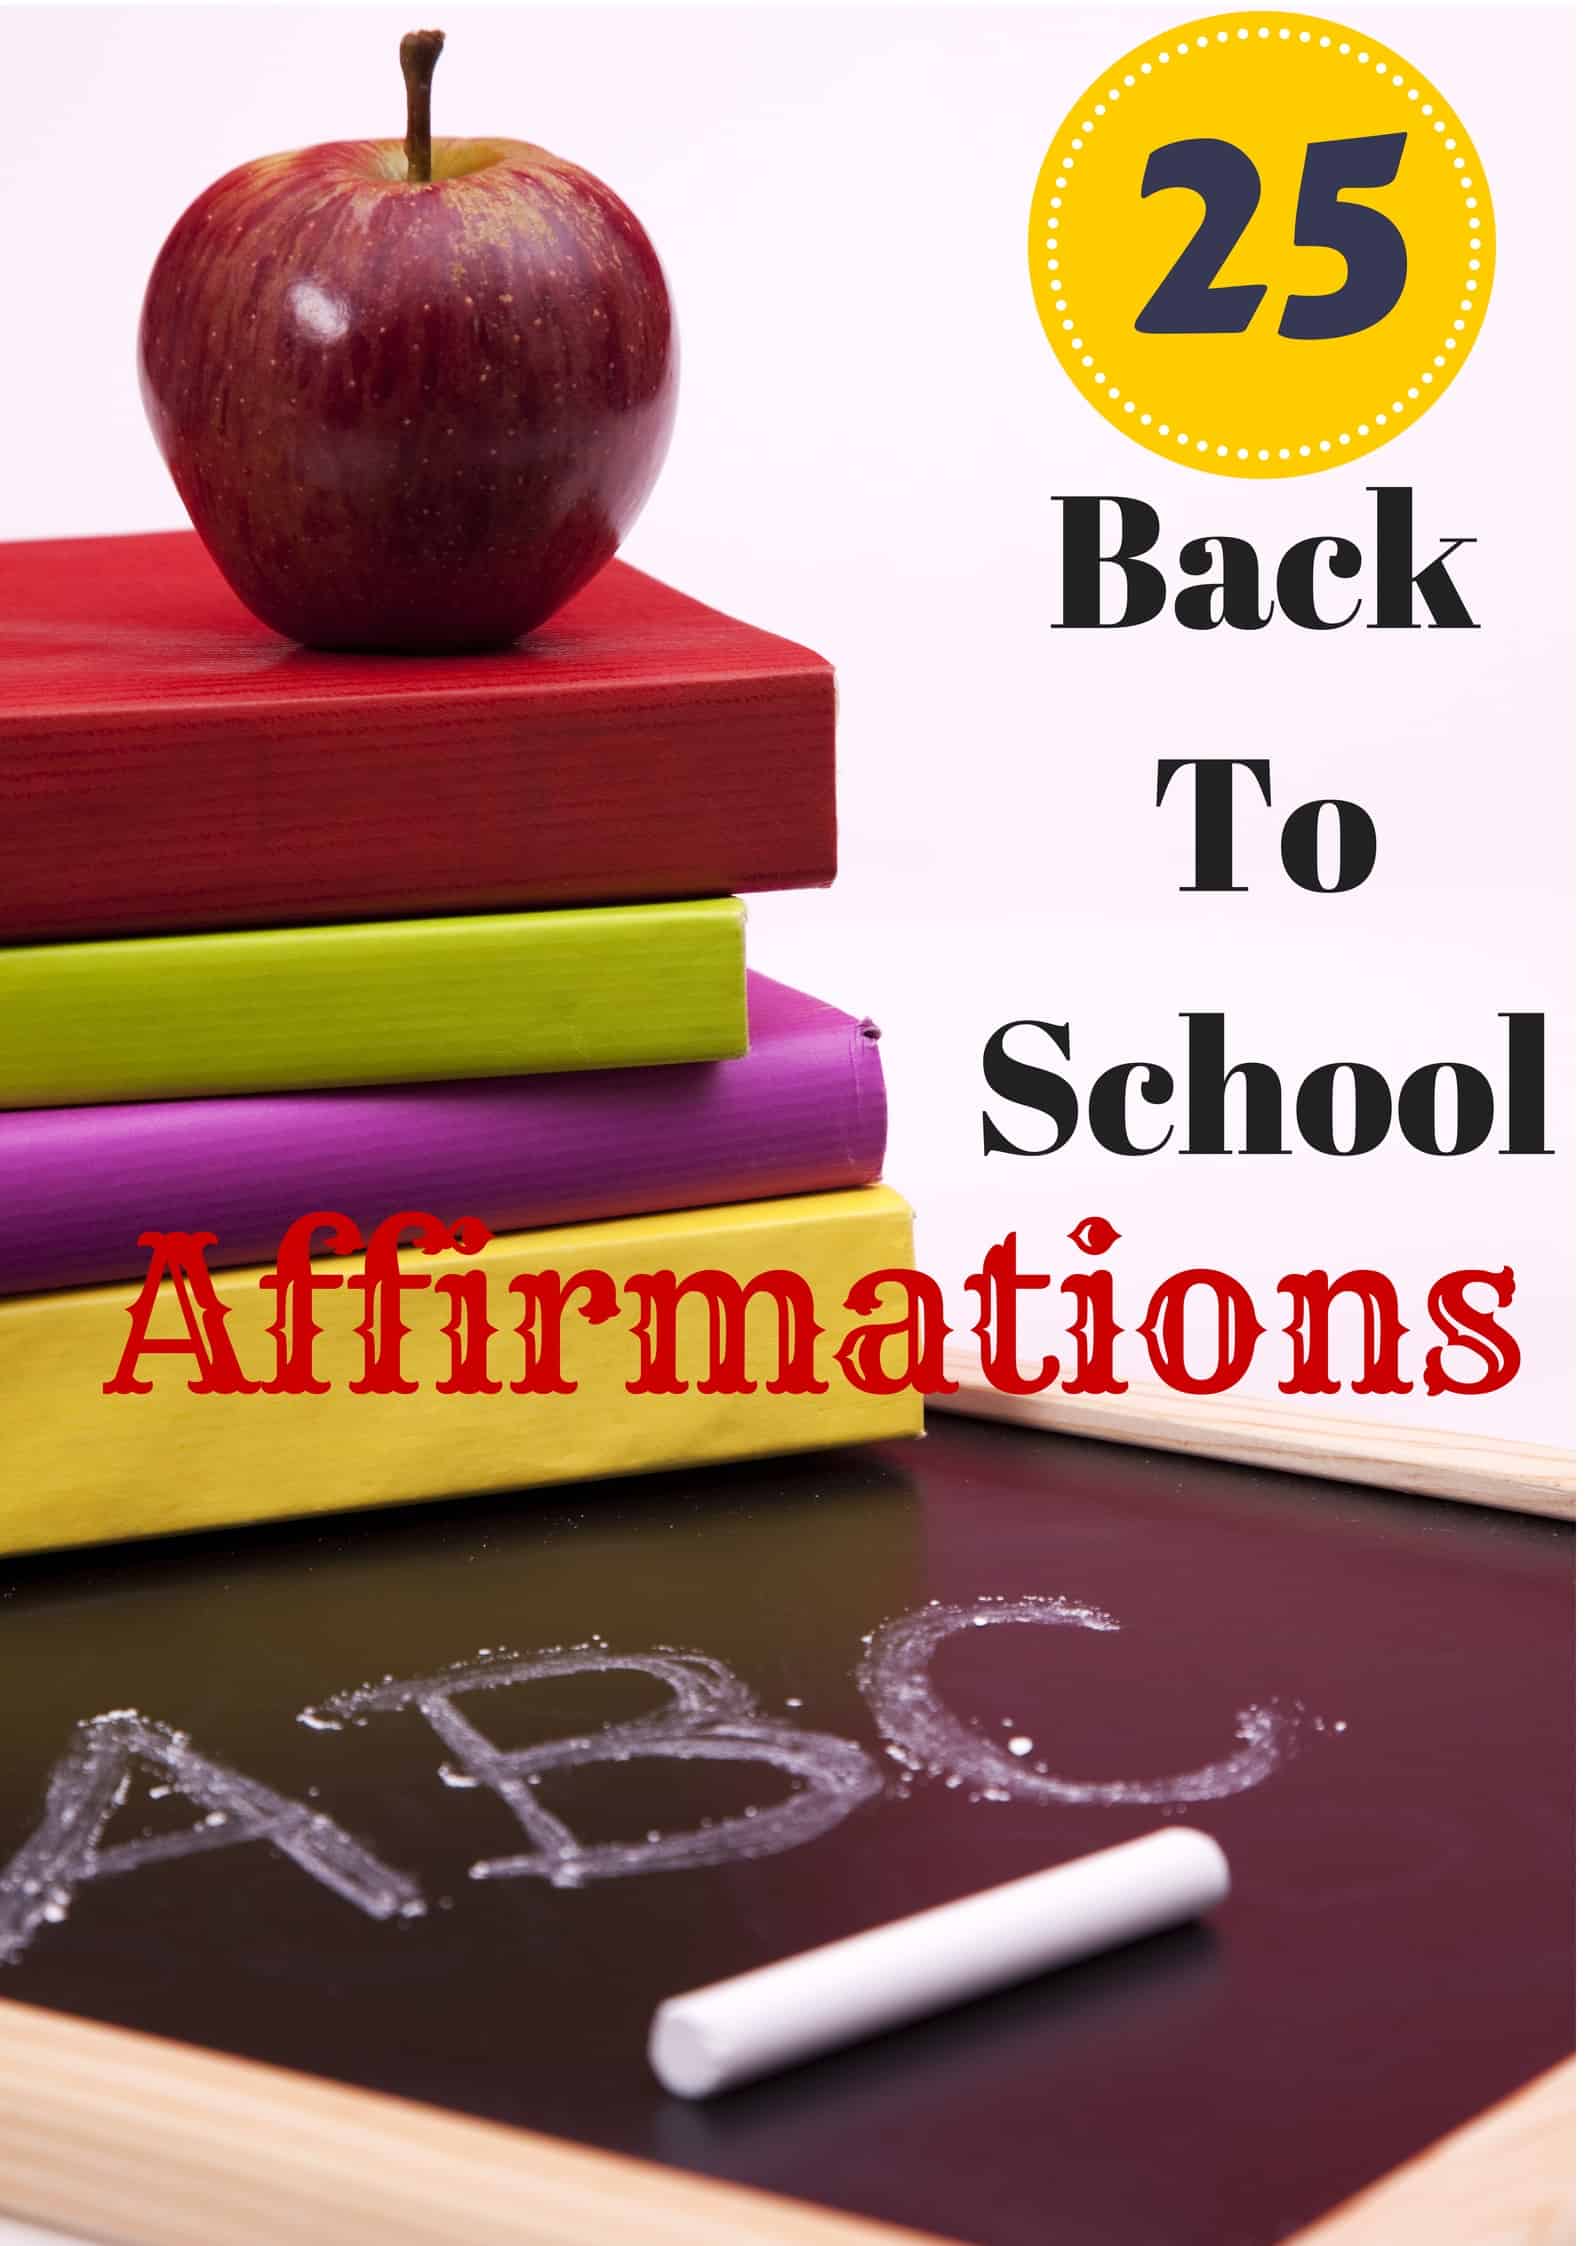 Here is a list of 25 back-to-school affirmations that are a perfect start to a child's day.